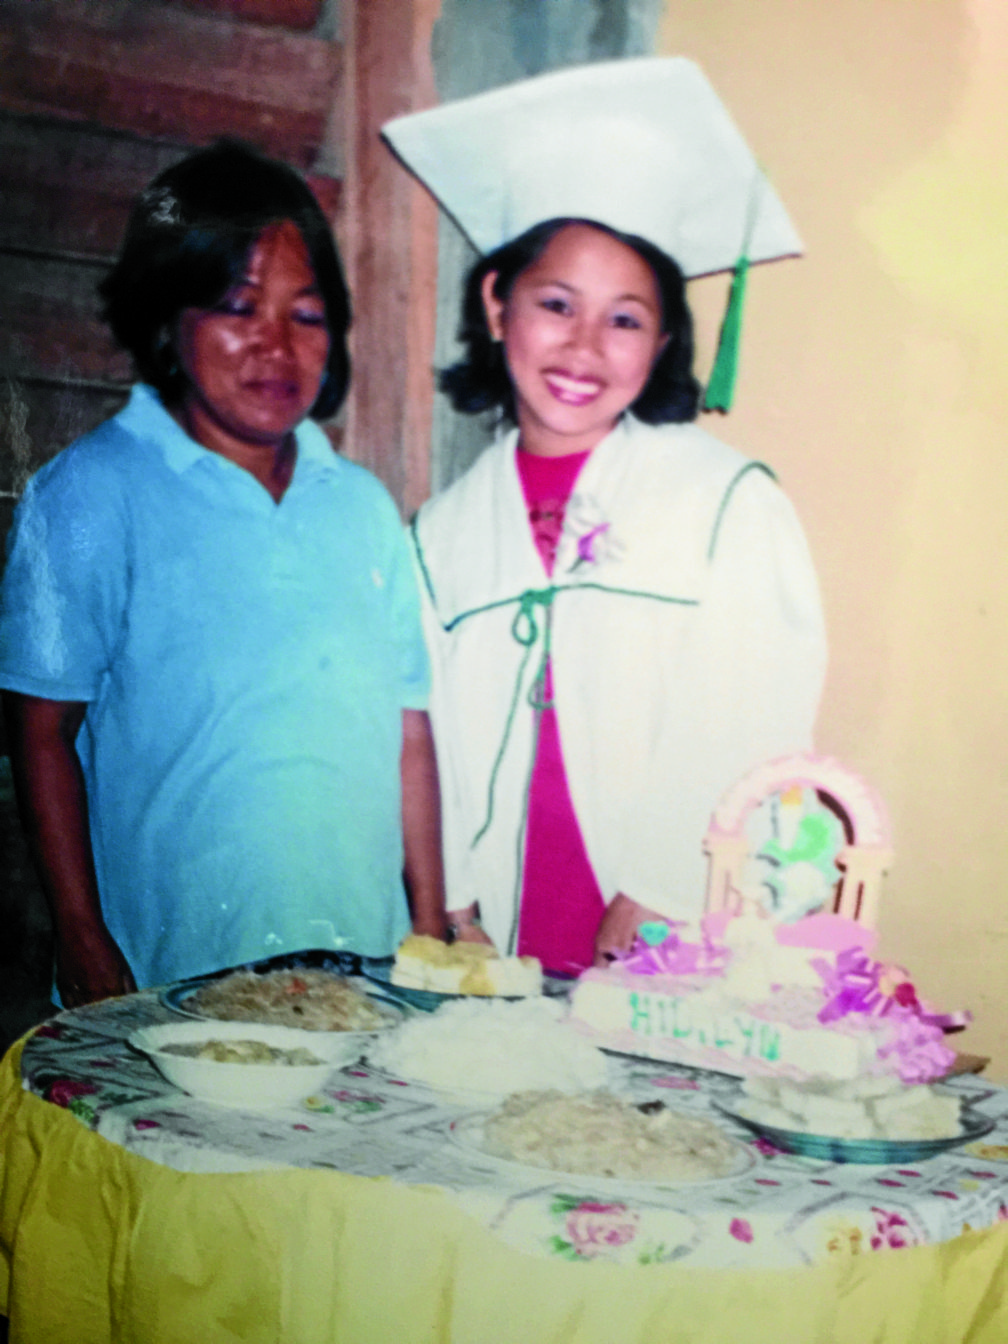 Despite family's hardships, Diazes make sure to have something simple but special for Hidilyn Diaz for every special occasion like birthday or graduation. Here Diaz, together with her mother Emelita, celebrated her highschool graduation from Universidad de Zamboanga Technical School. In her younger days, Hidilyn Diaz already tried bigger weights beyond her weight. REPRODUCTION PHOTO BY JULIE ALIPALA